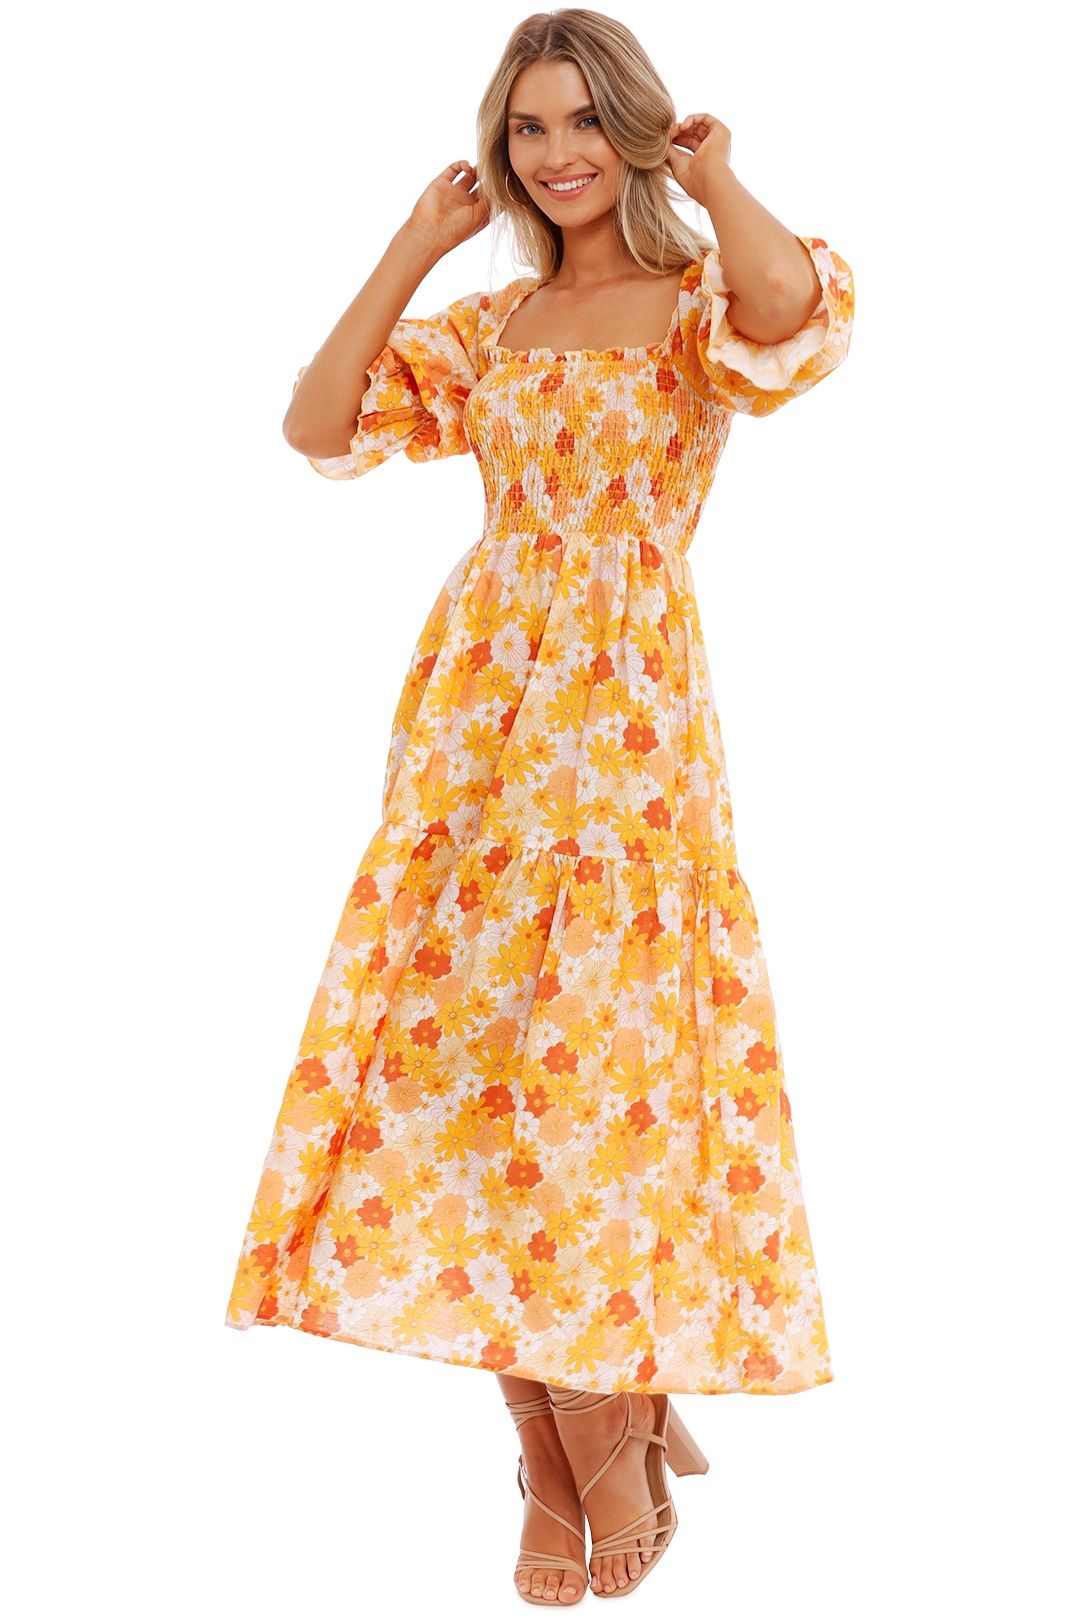 Charlie Holiday Amber Dress Seventies Floral straight